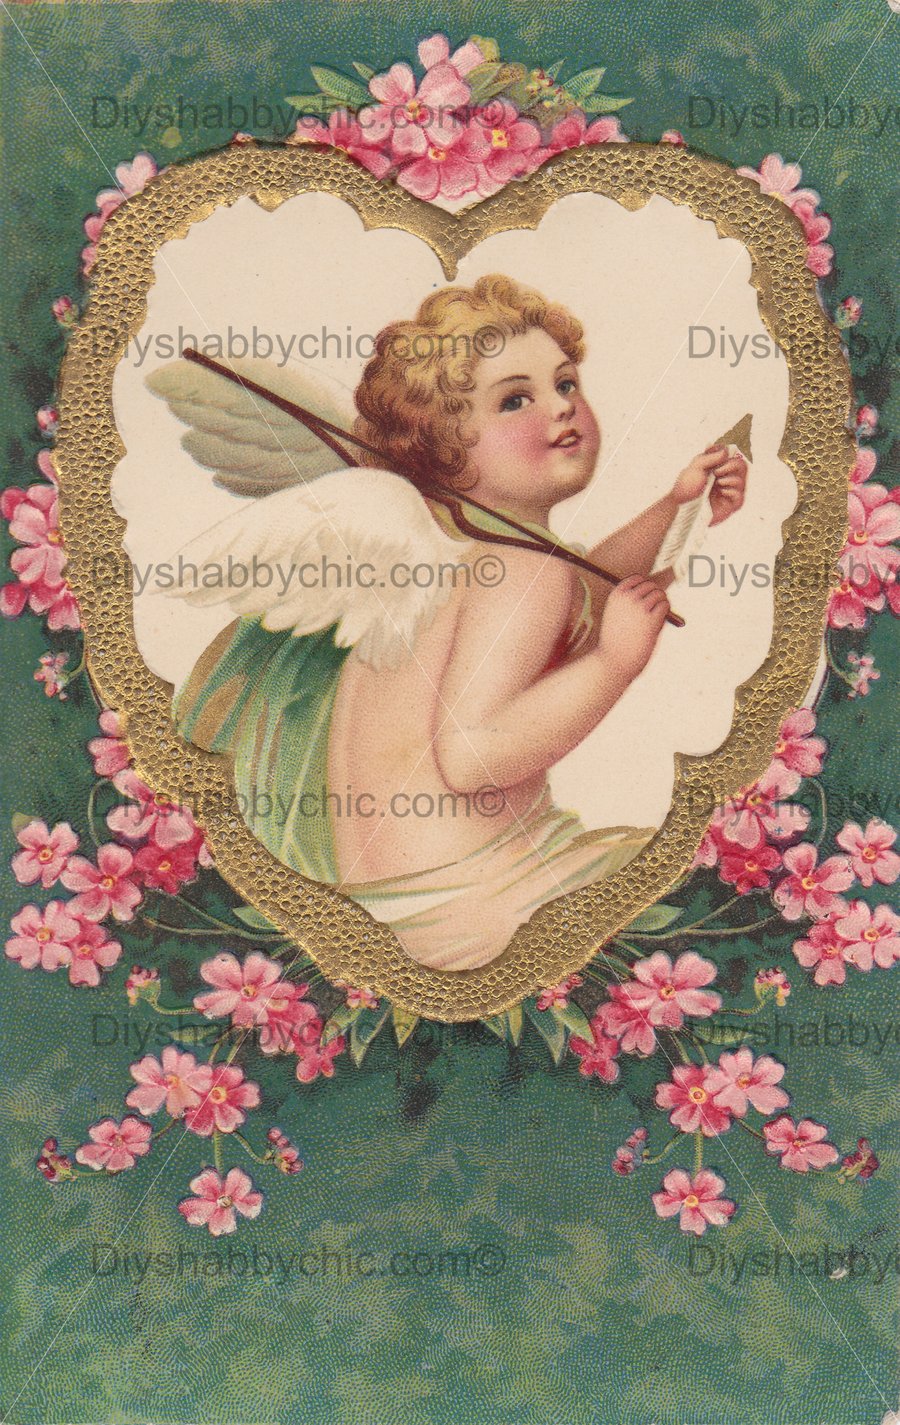 Waterslide Wood Furniture Decal Vintage Image Transfer Shabby Chic Angel Heart